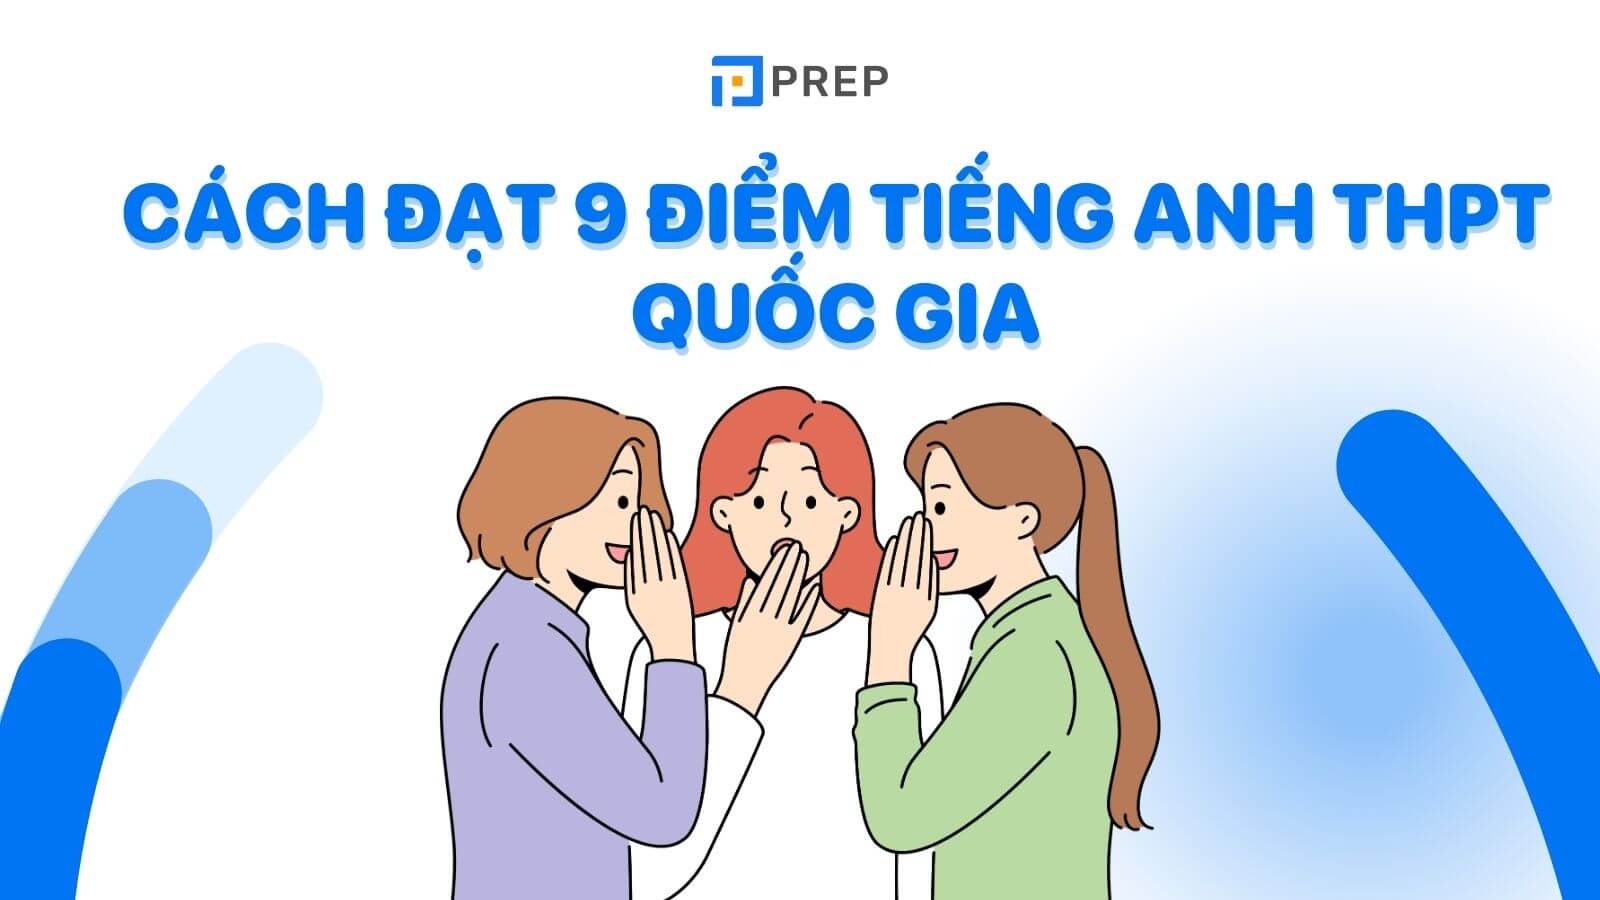 cach-dat-9-diem-tieng-anh-thpt-quoc-gia.jpg